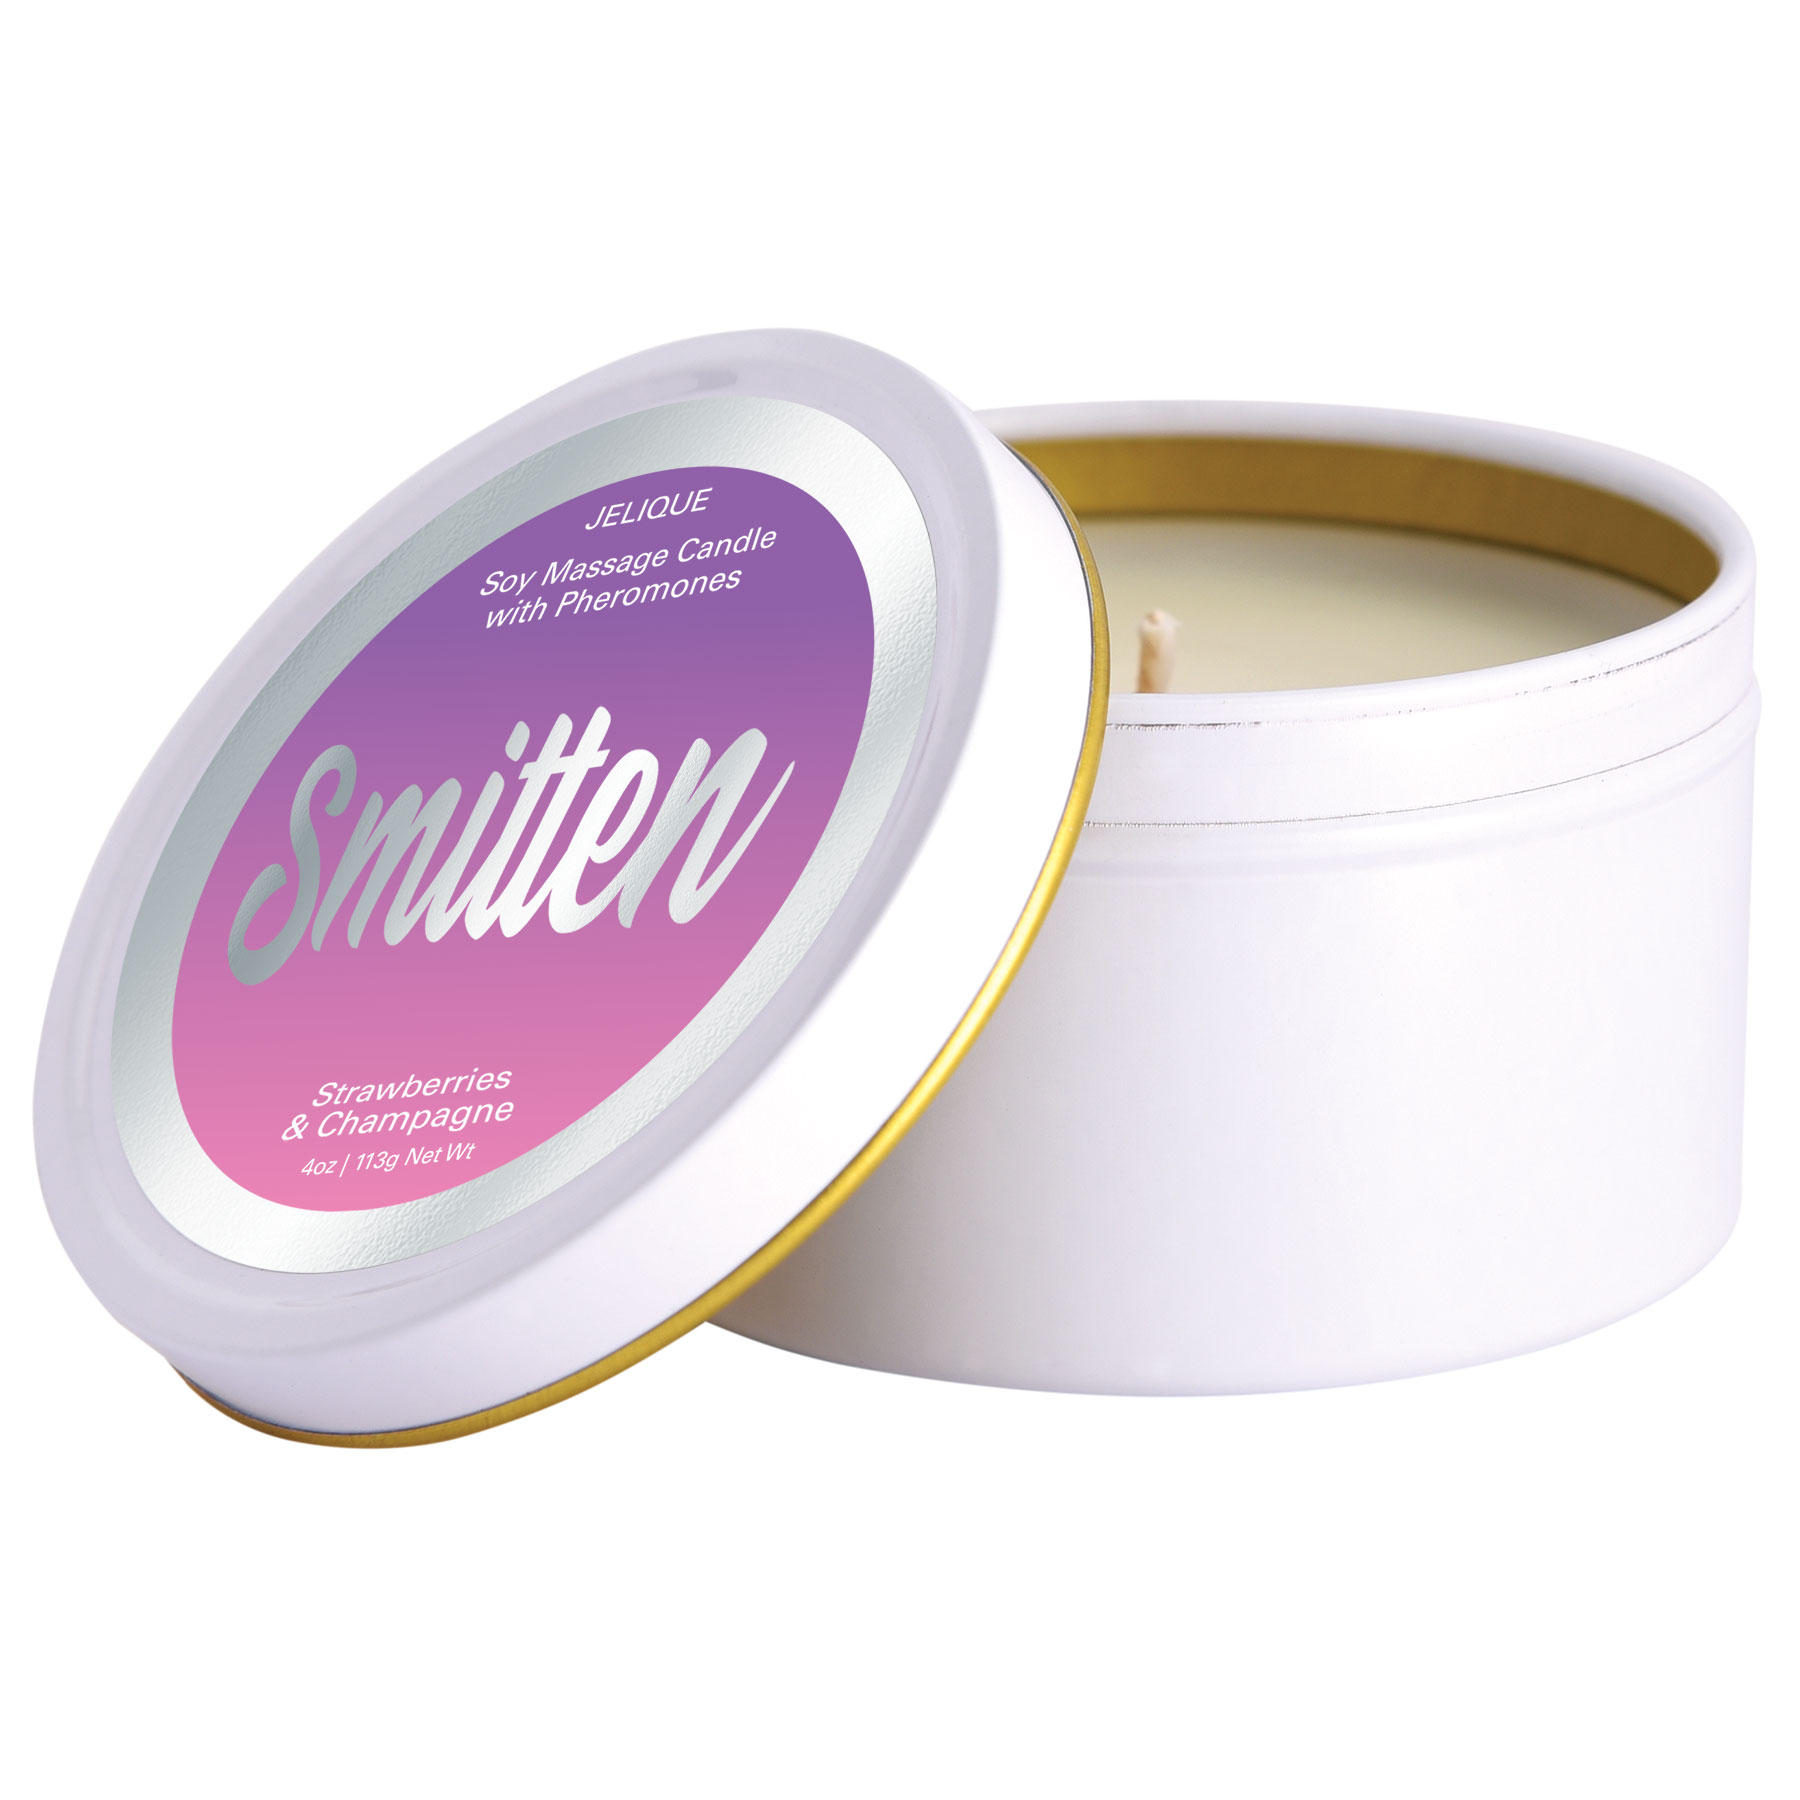 mood candle smitten strawberry and champagne  oz. jar 